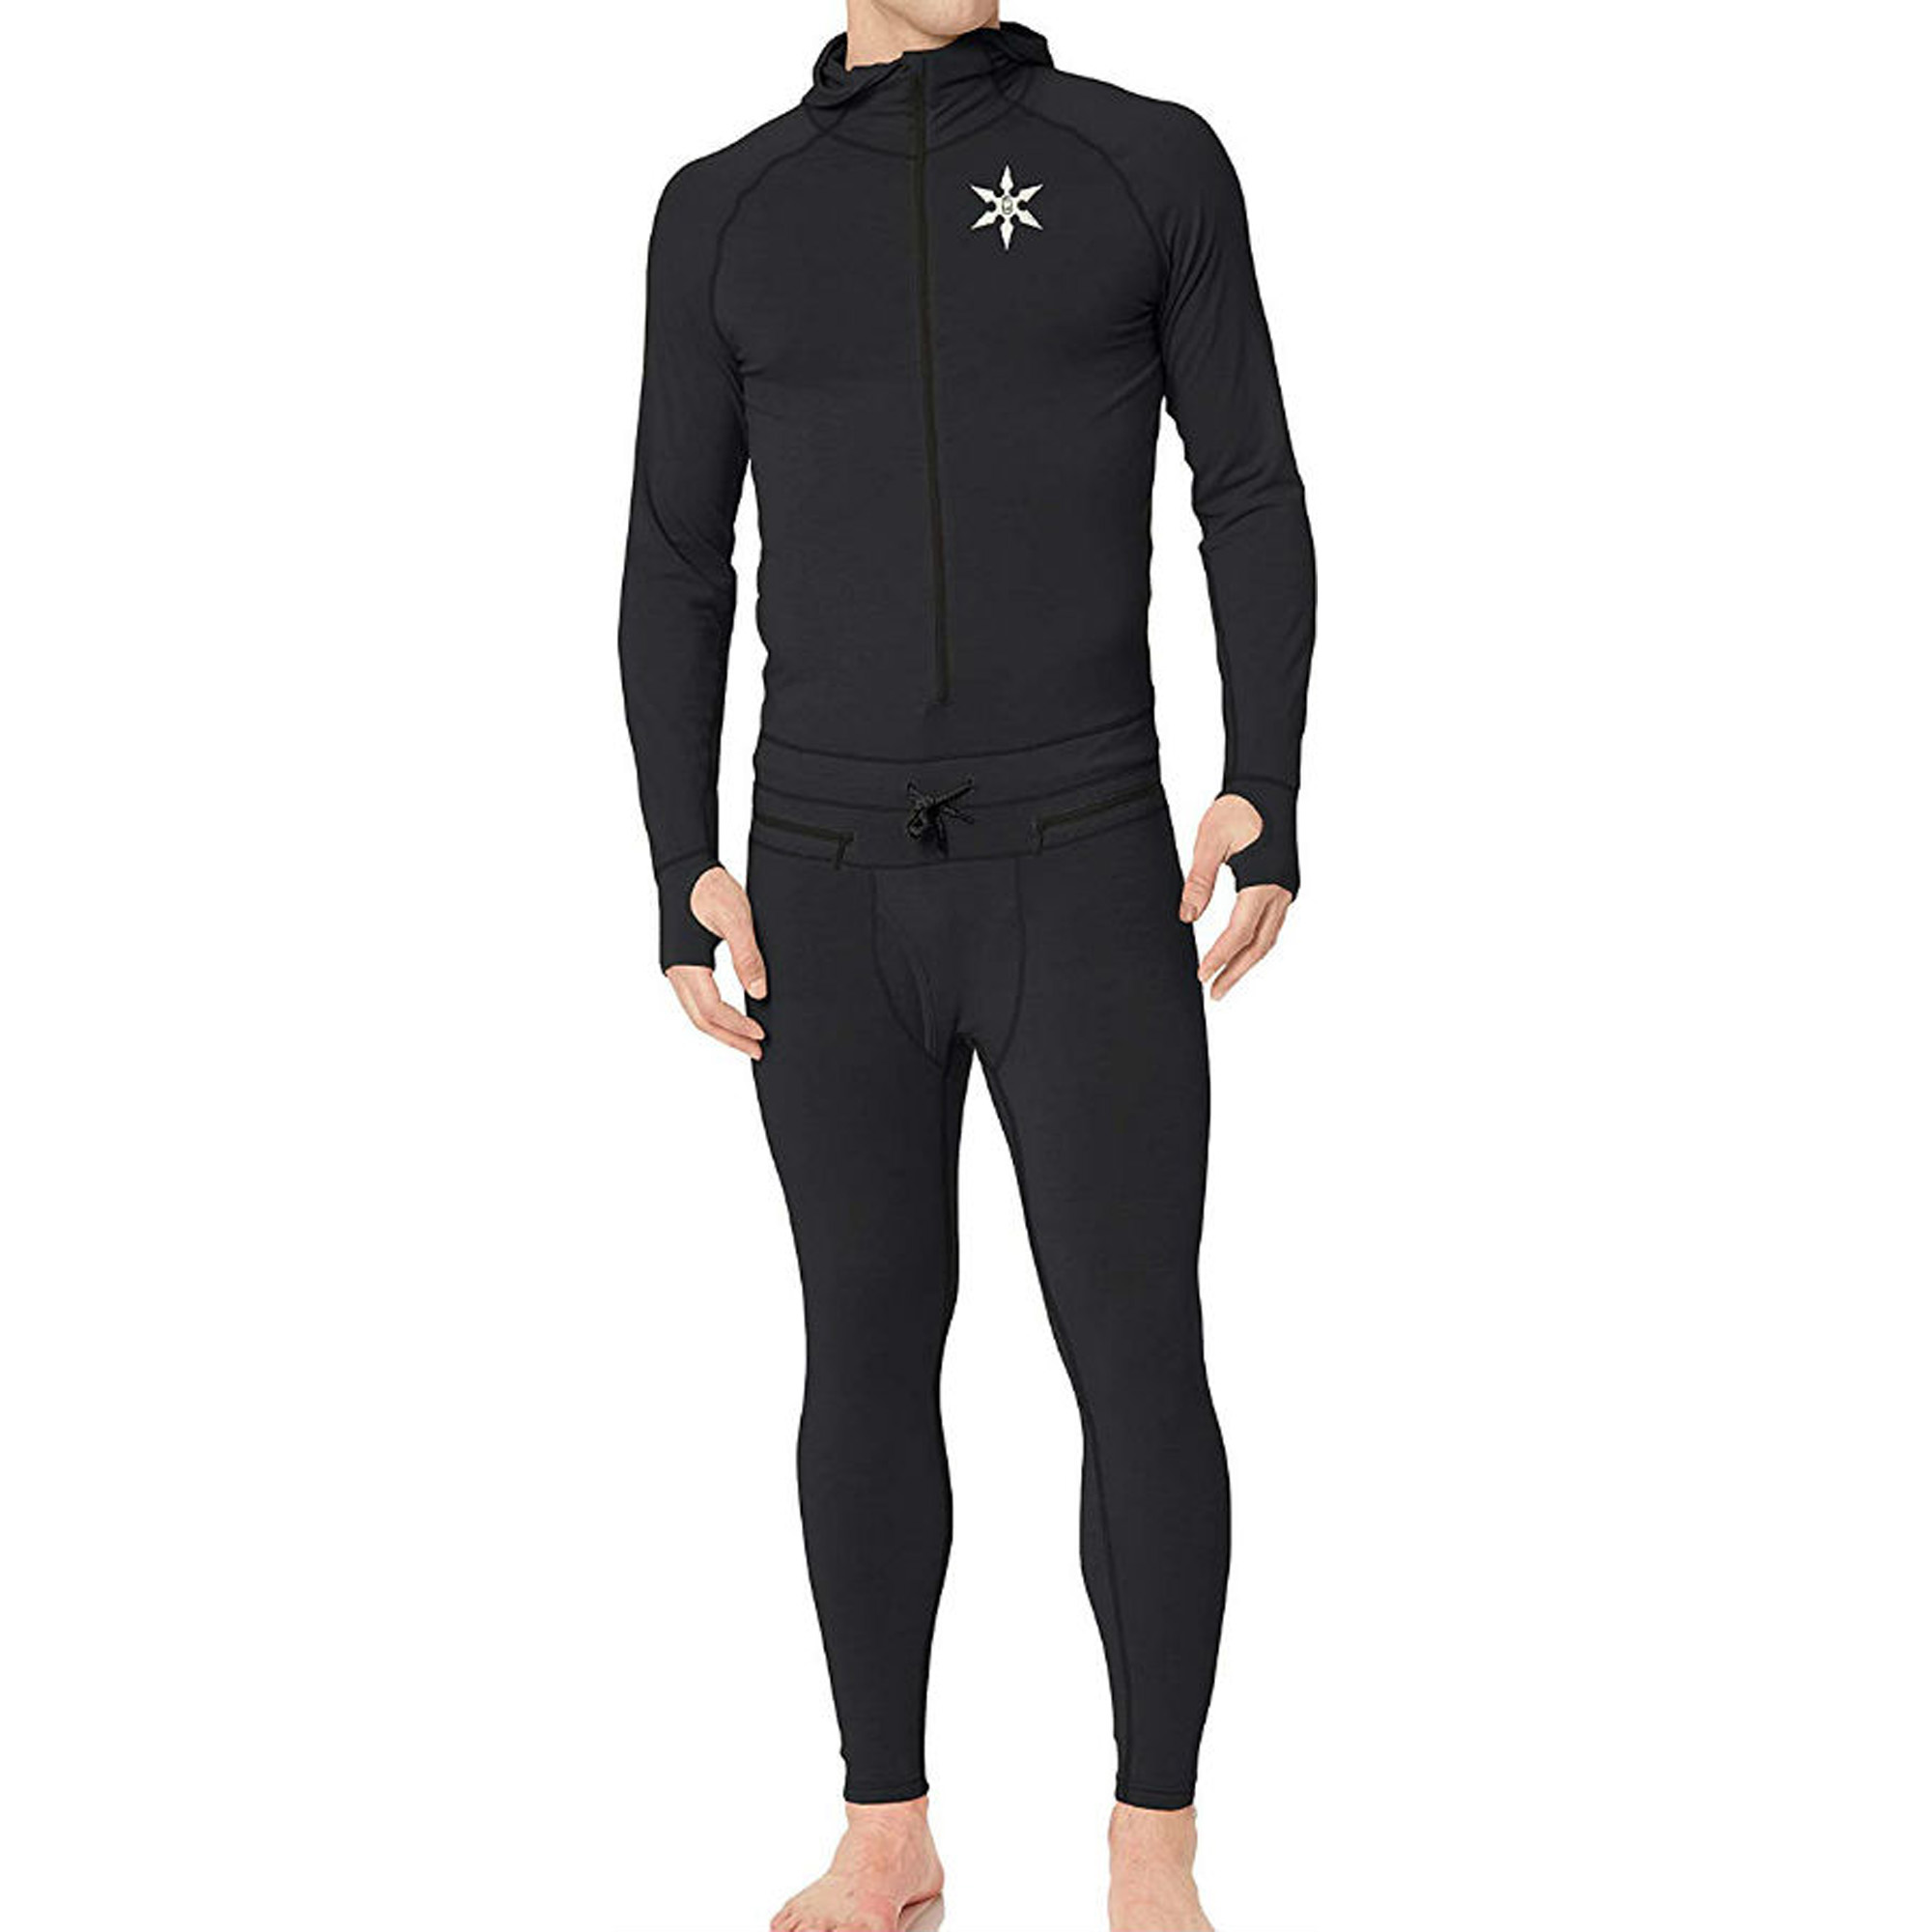 Airblaster Classic Ninja Suit Hooded Thermal Base Layer